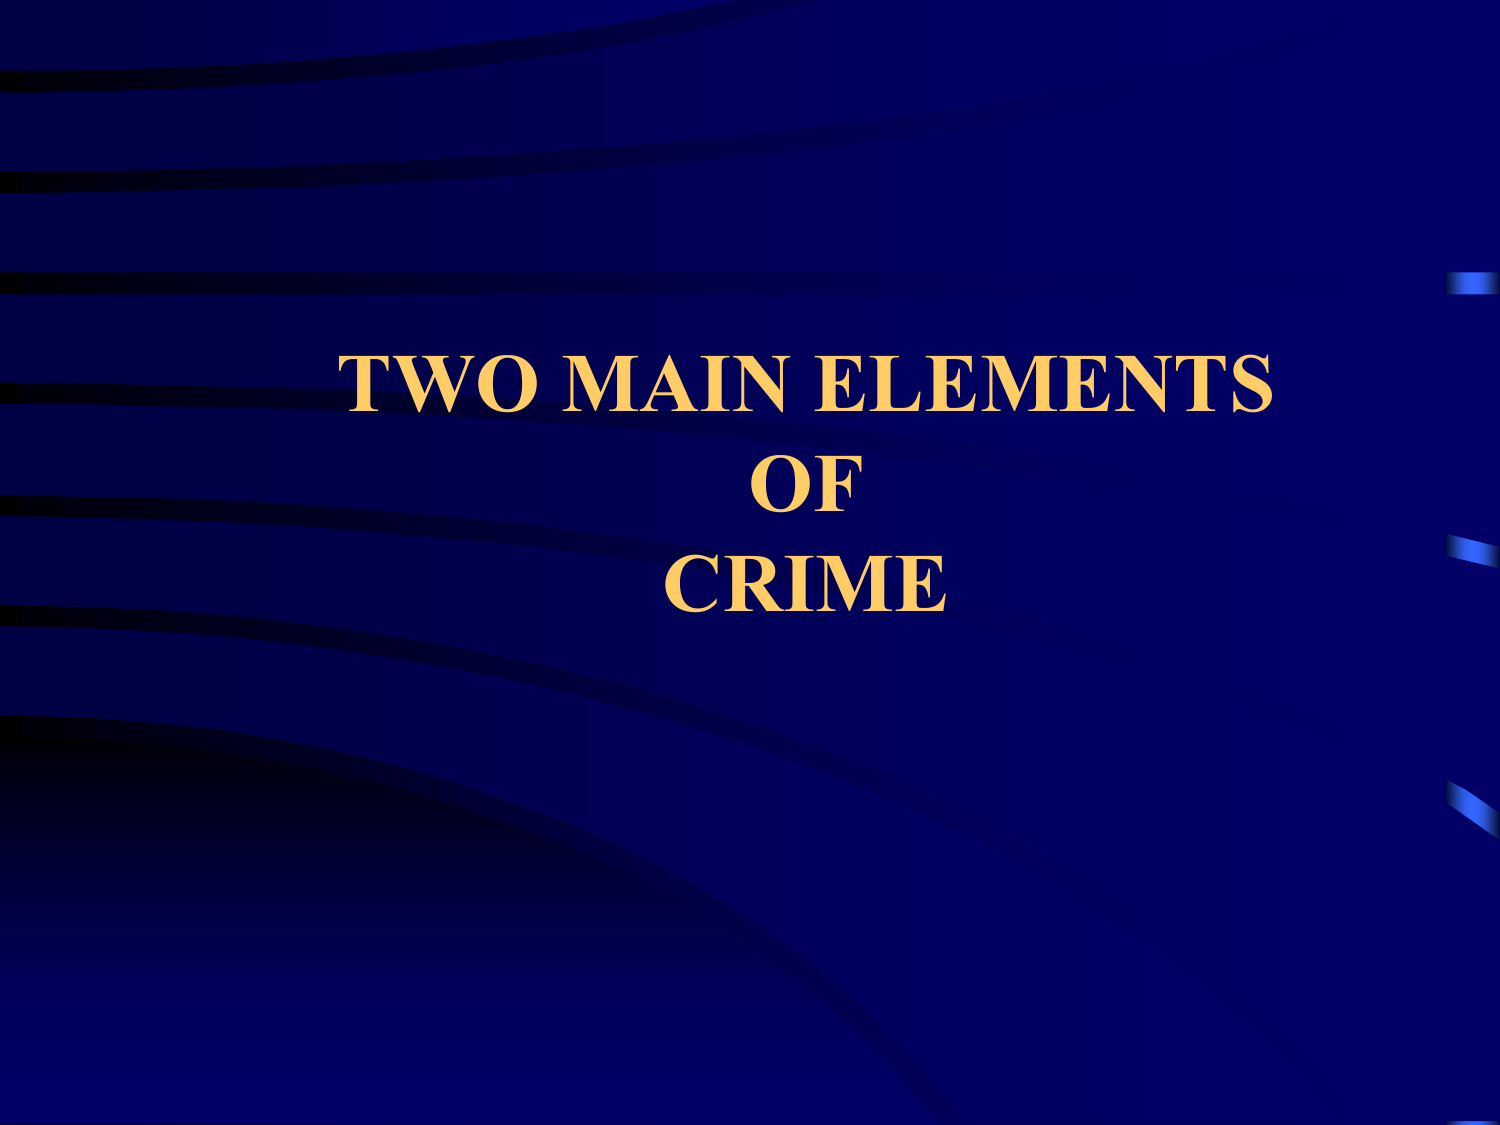 4 elements of crime